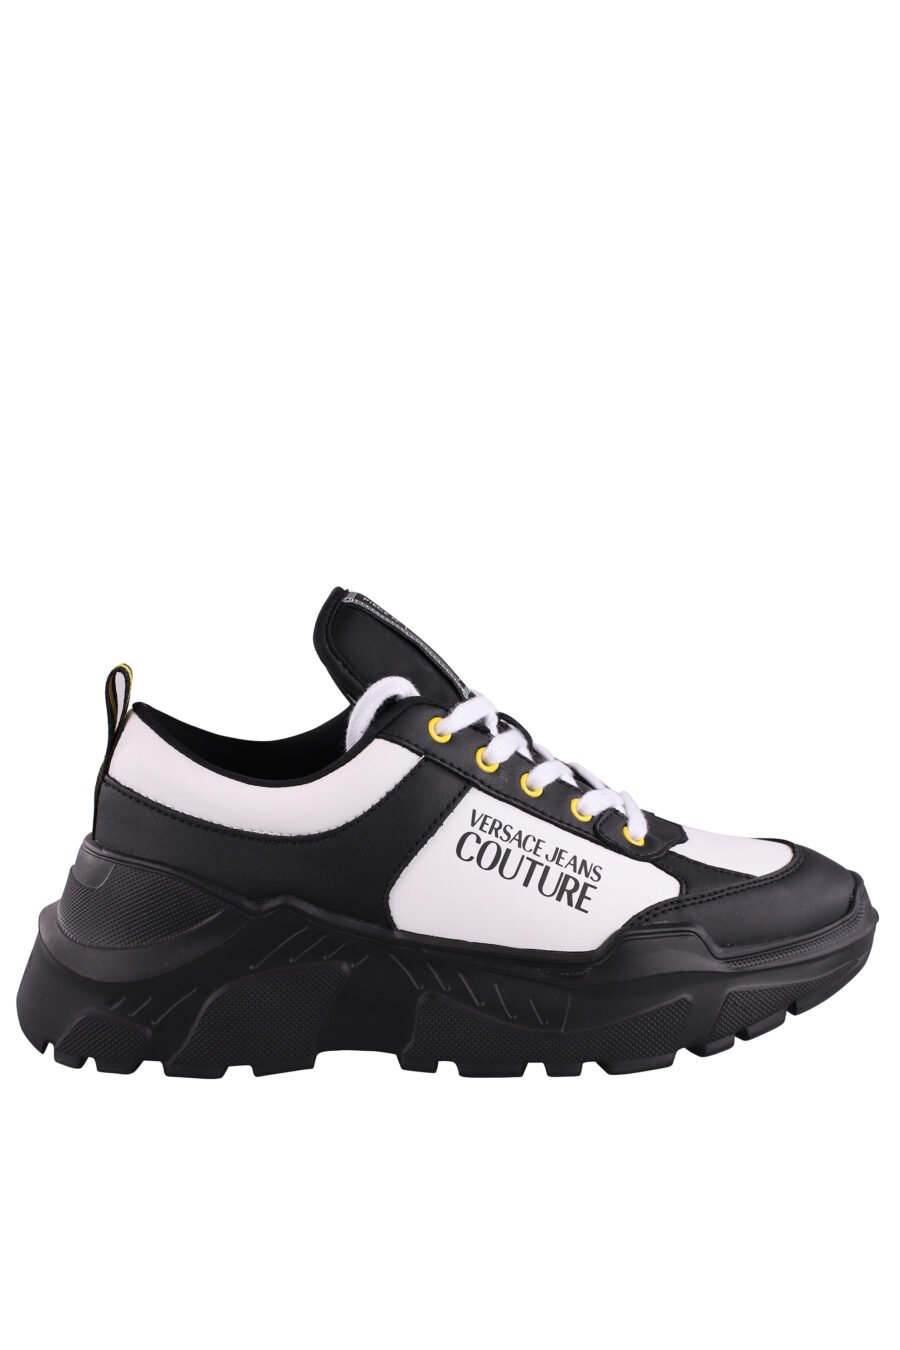 Black and white bicolour trainers with logo and yellow detail - IMG 9067